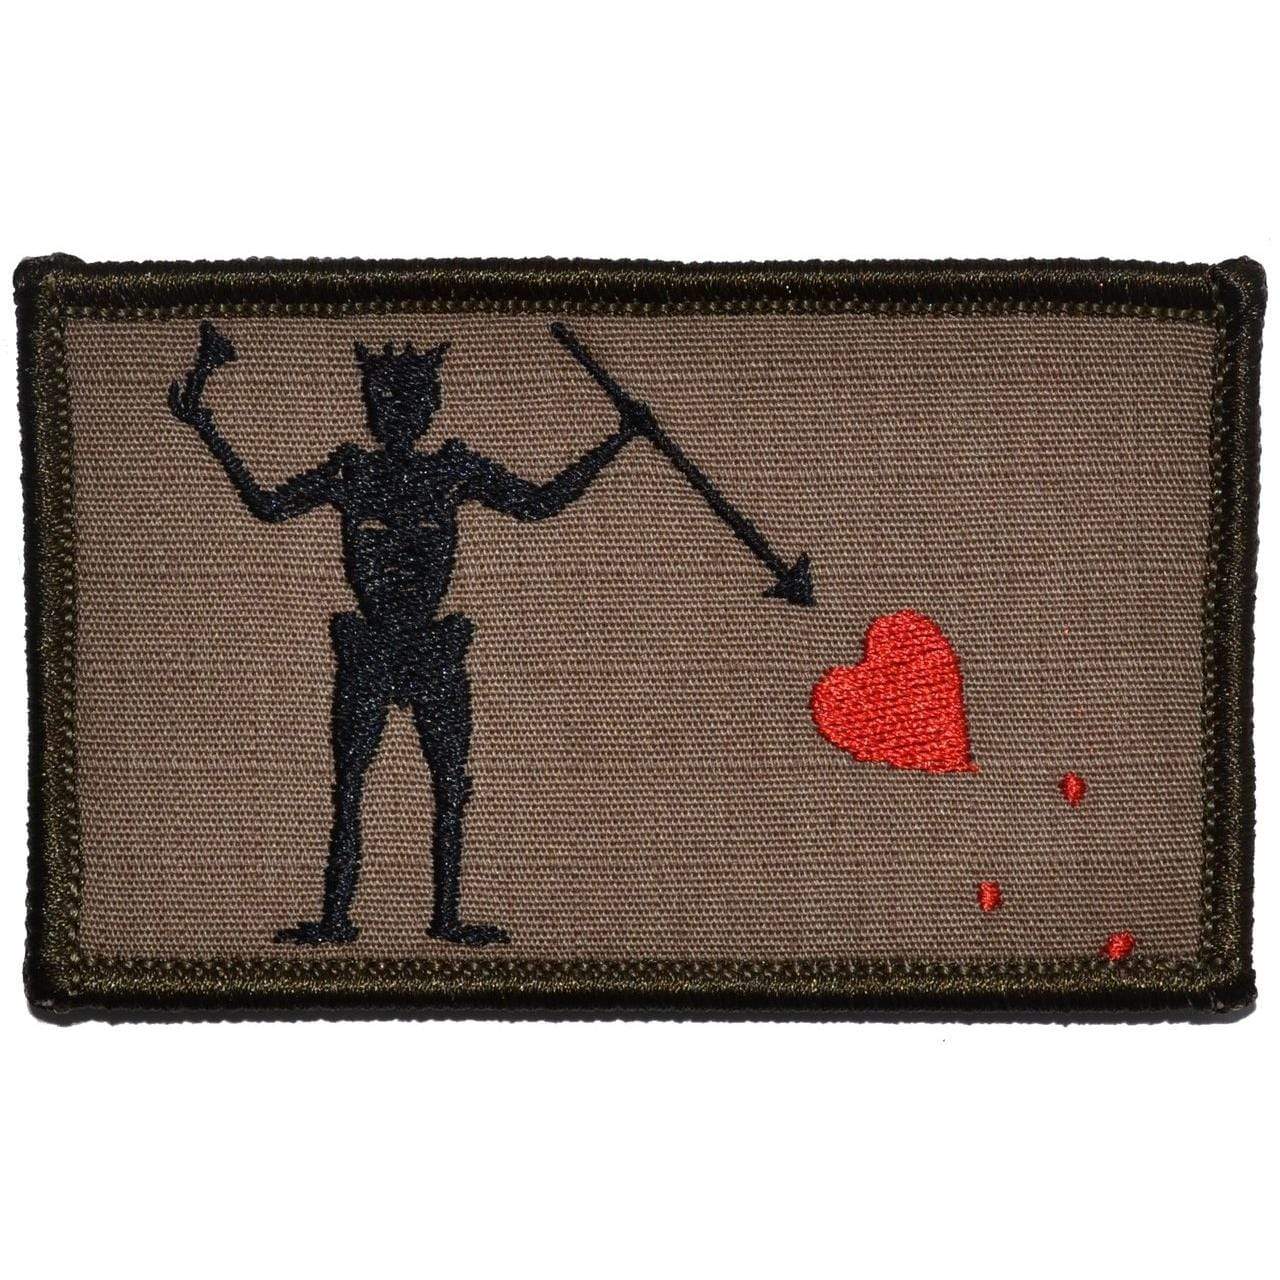 Tactical Gear Junkie Patches Coyote Brown w/ Black Edward Teach Blackbeard Pirate Flag - 3.75x2.25 Patch